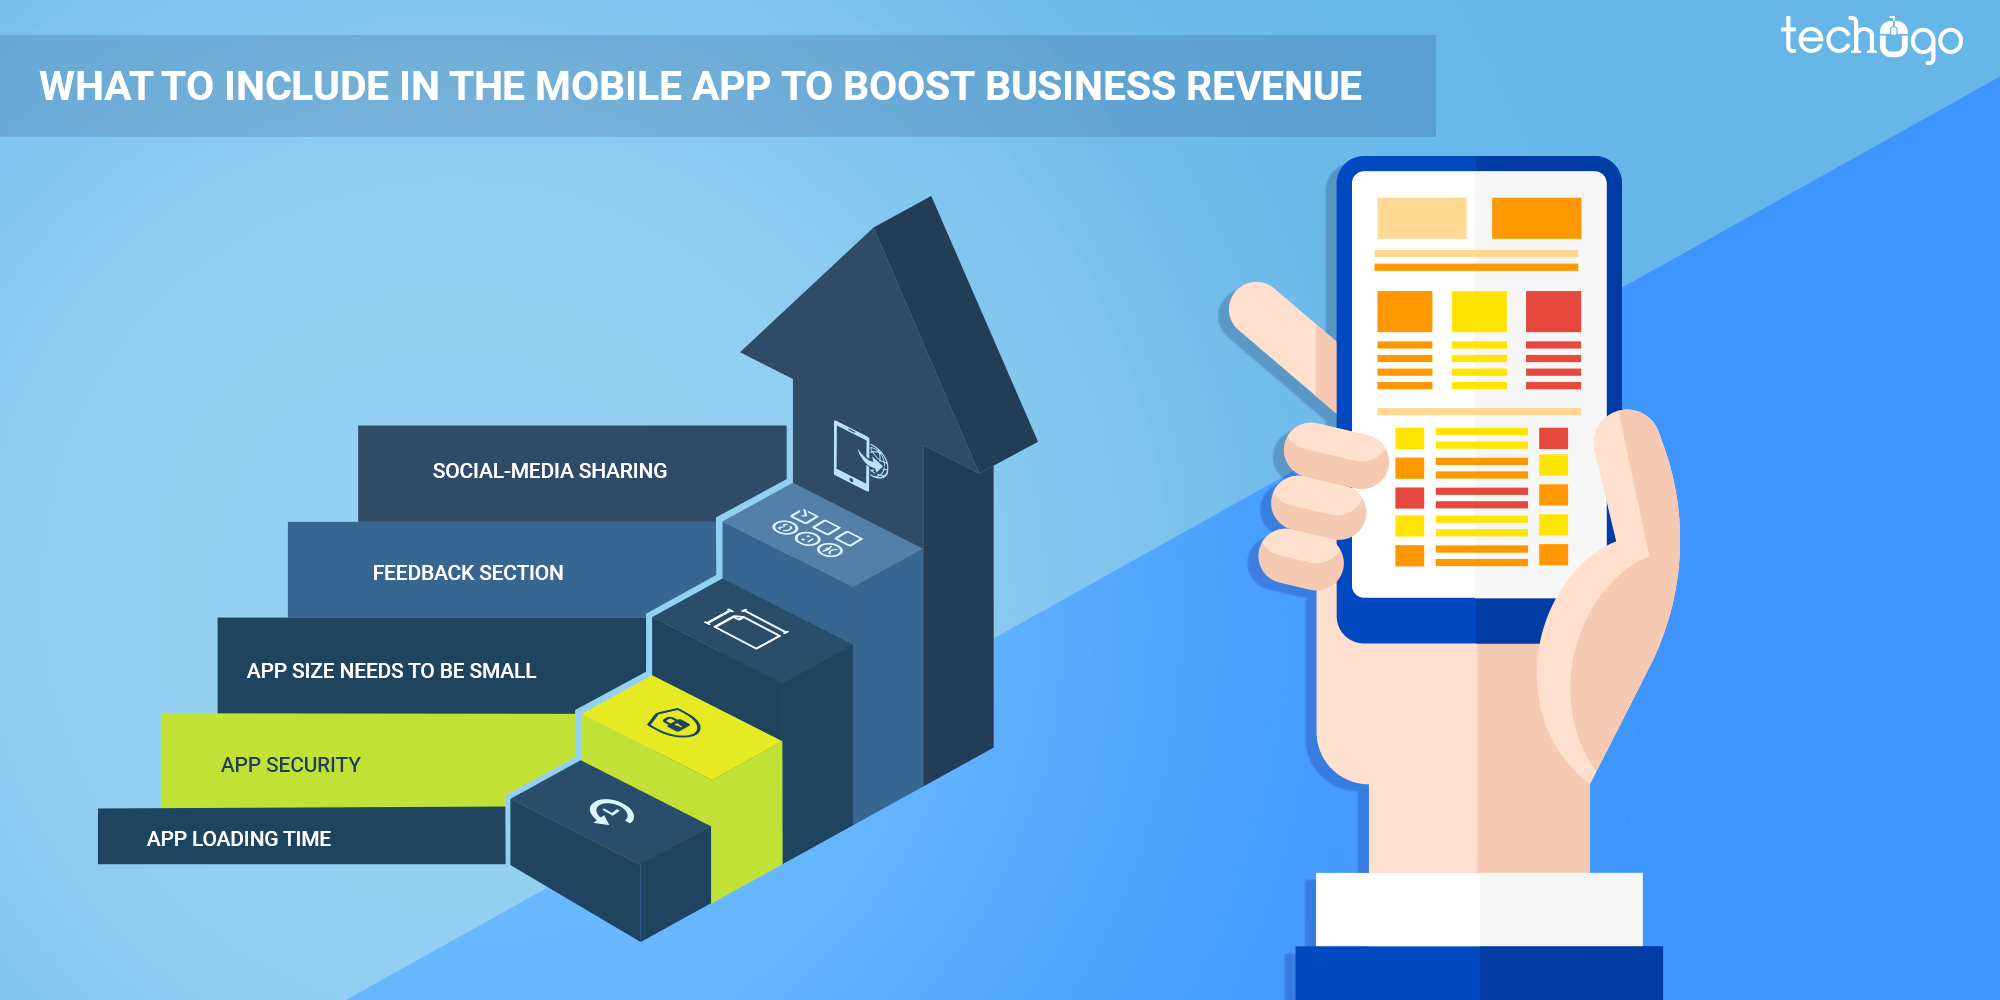 What To Include In The Mobile App To Boost Business Revenue